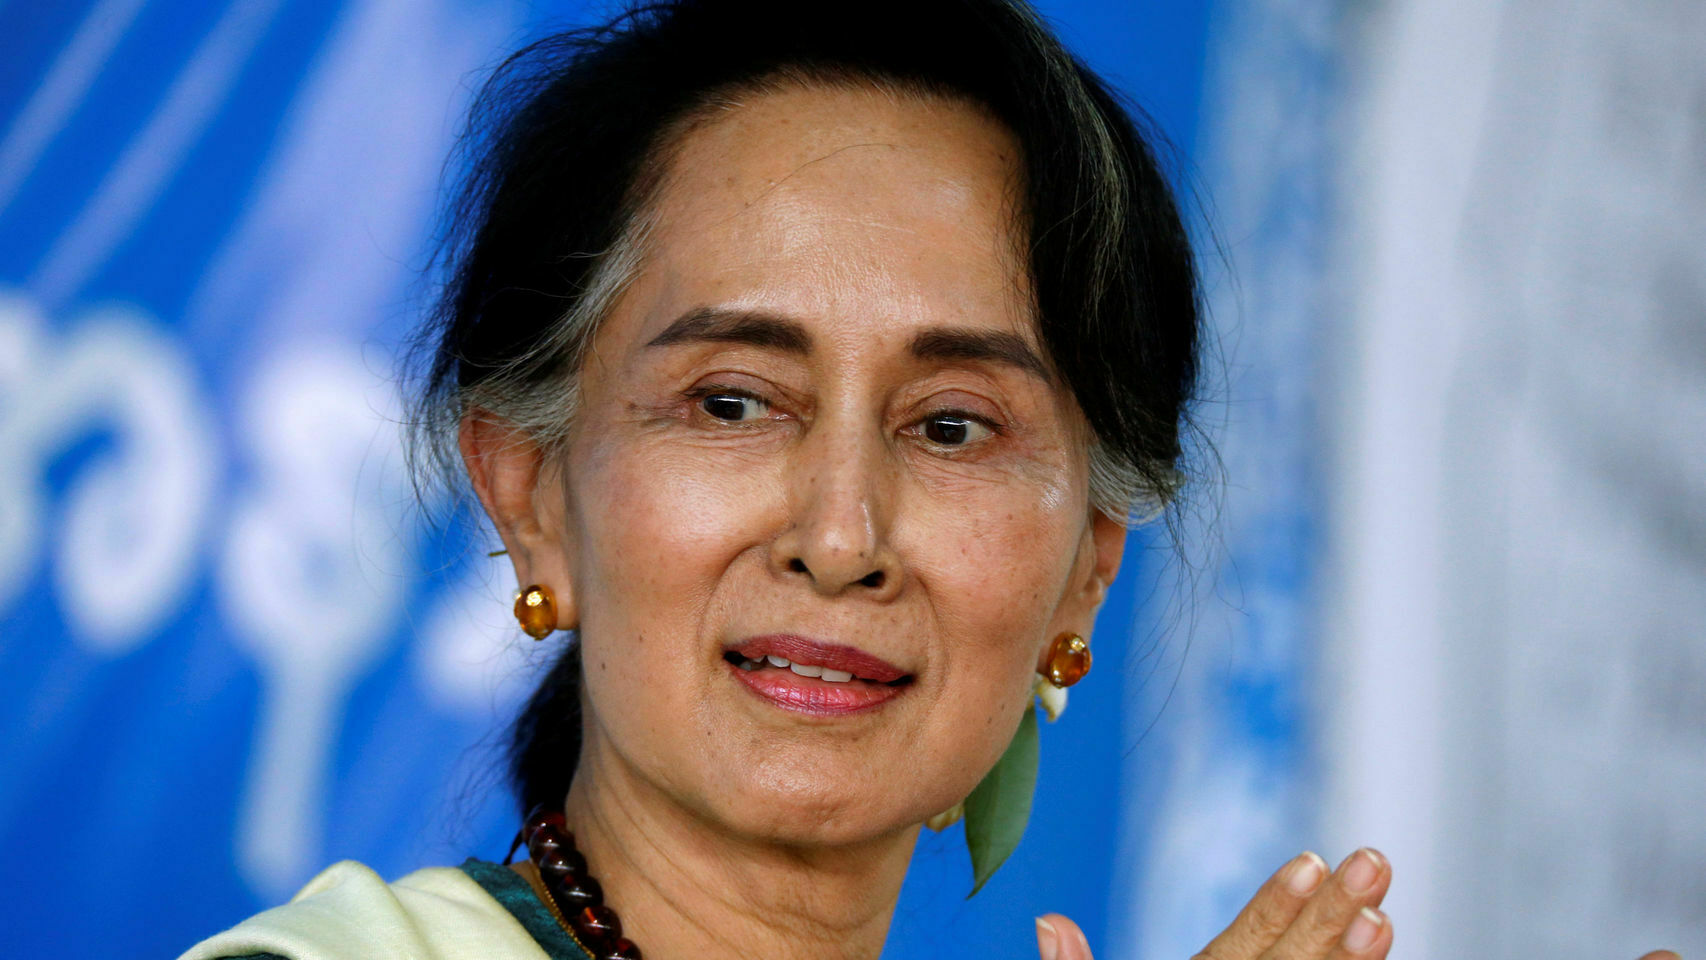 The West was disappointed: why the President of Myanmar was ousted